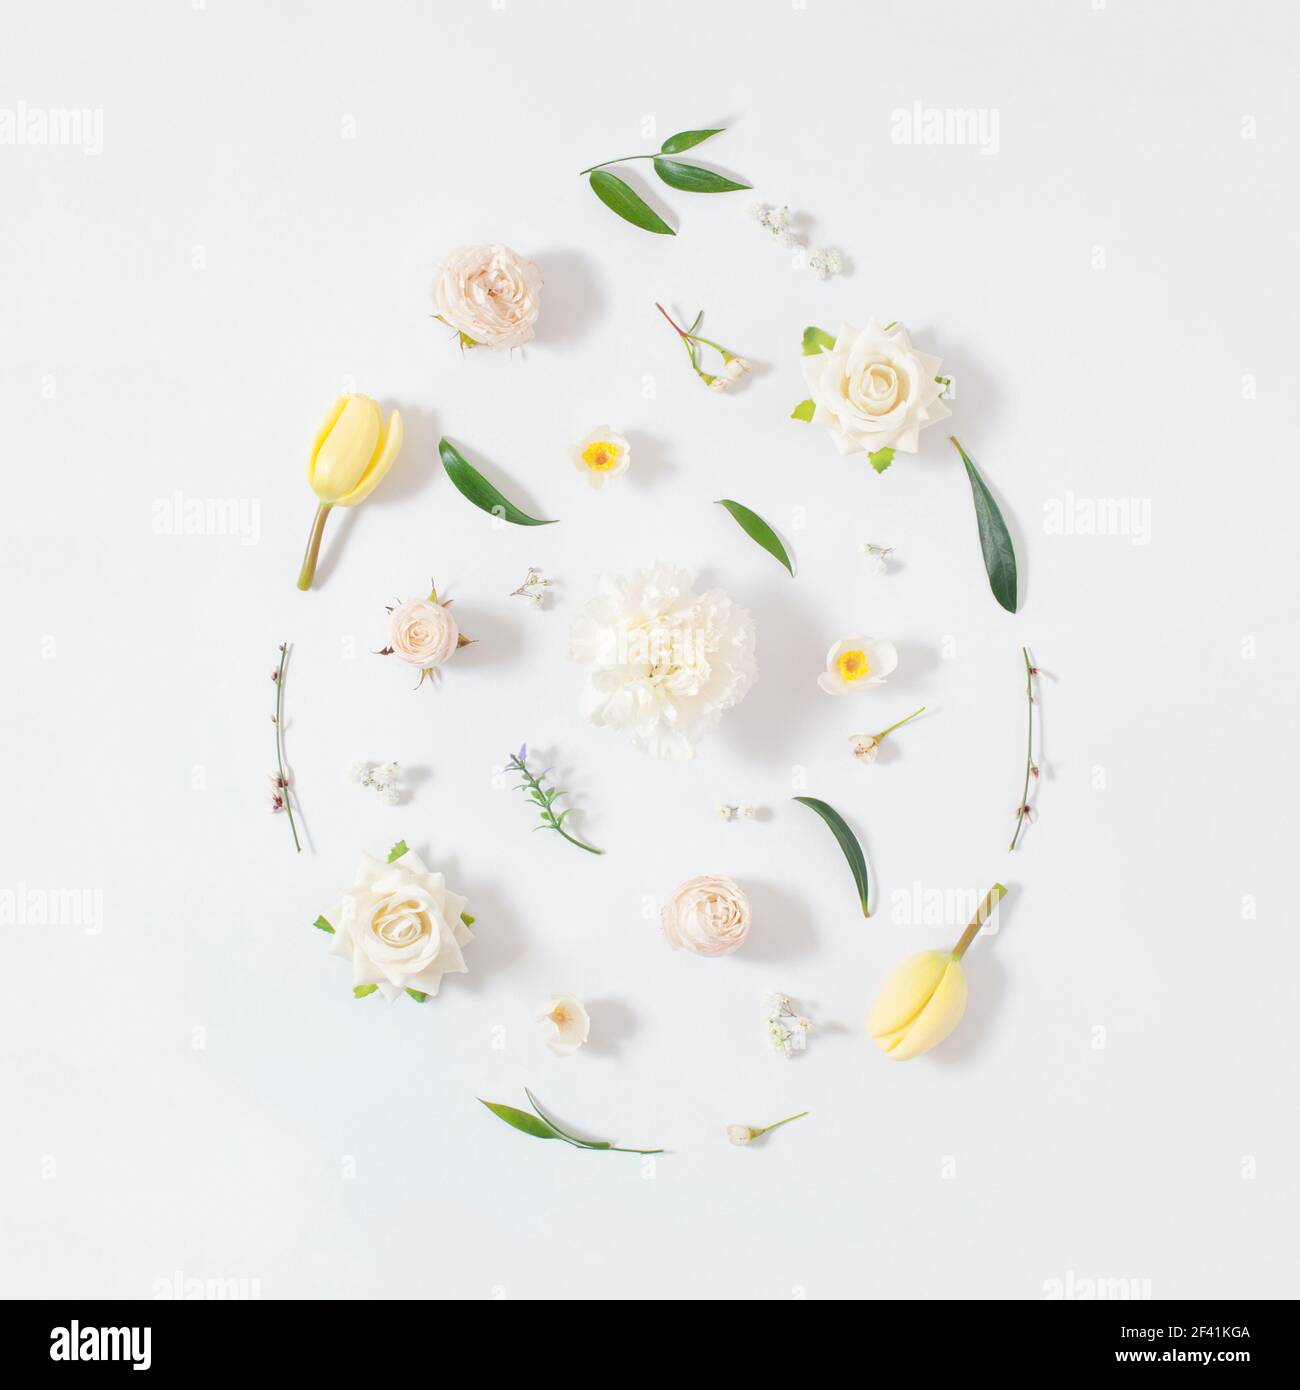 2021 Easter egg shape arrange from colorful  spring flowers and green leafs over white background.  Minimal flat lay holiday concept. Stock Photo